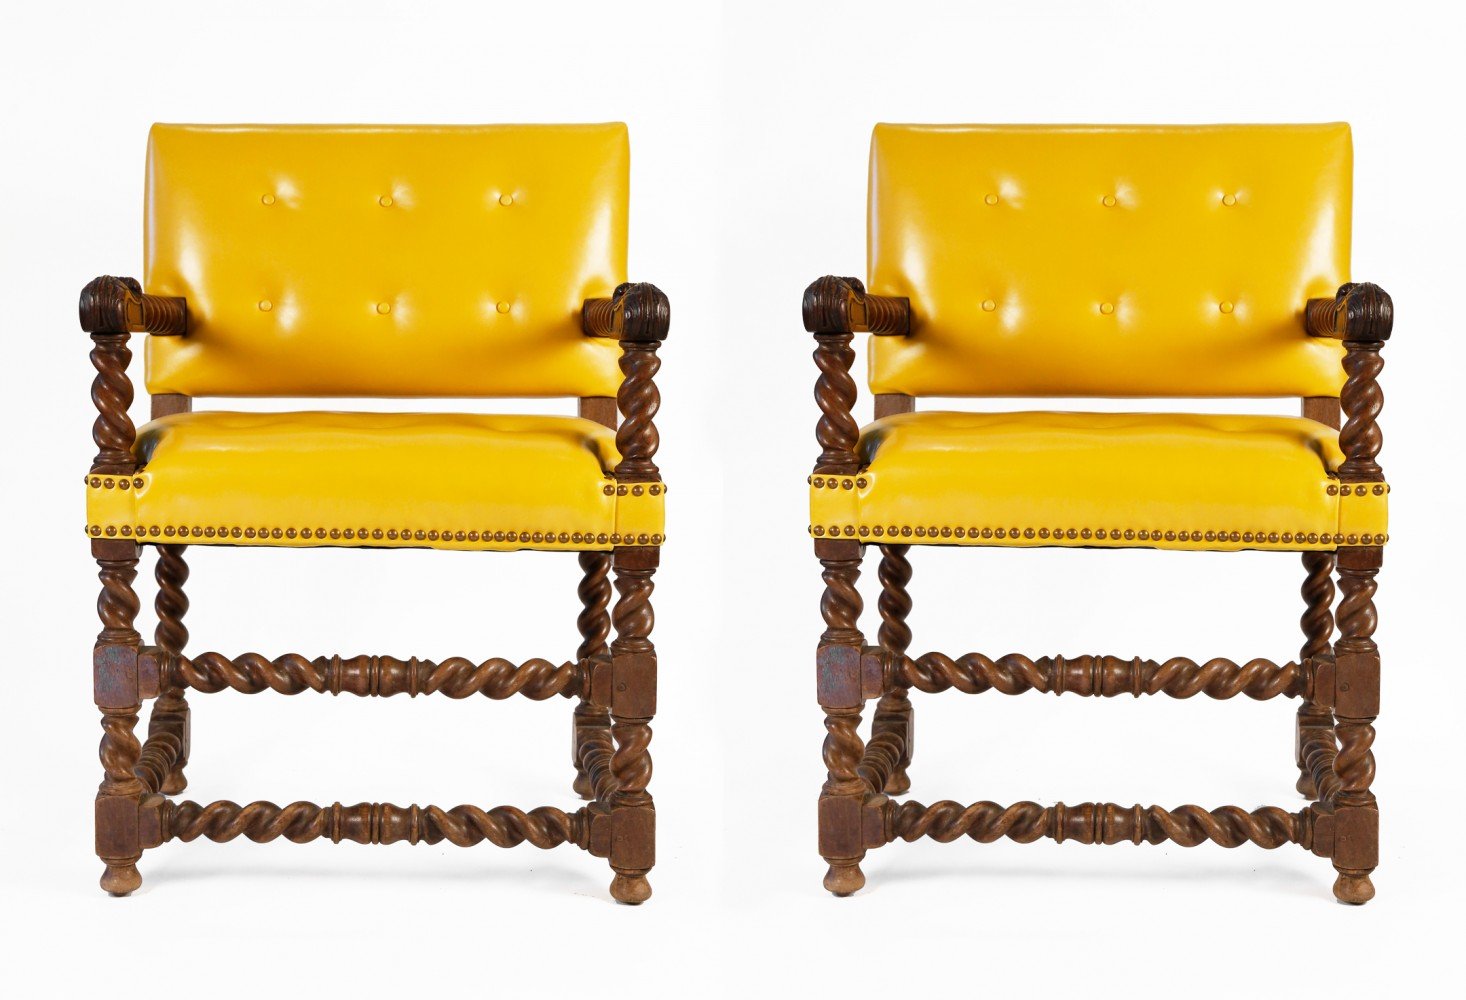 Pair of Late 17thc. English Open Armchairs with Canary Yellow Leather Upholstery by 17th Century British School